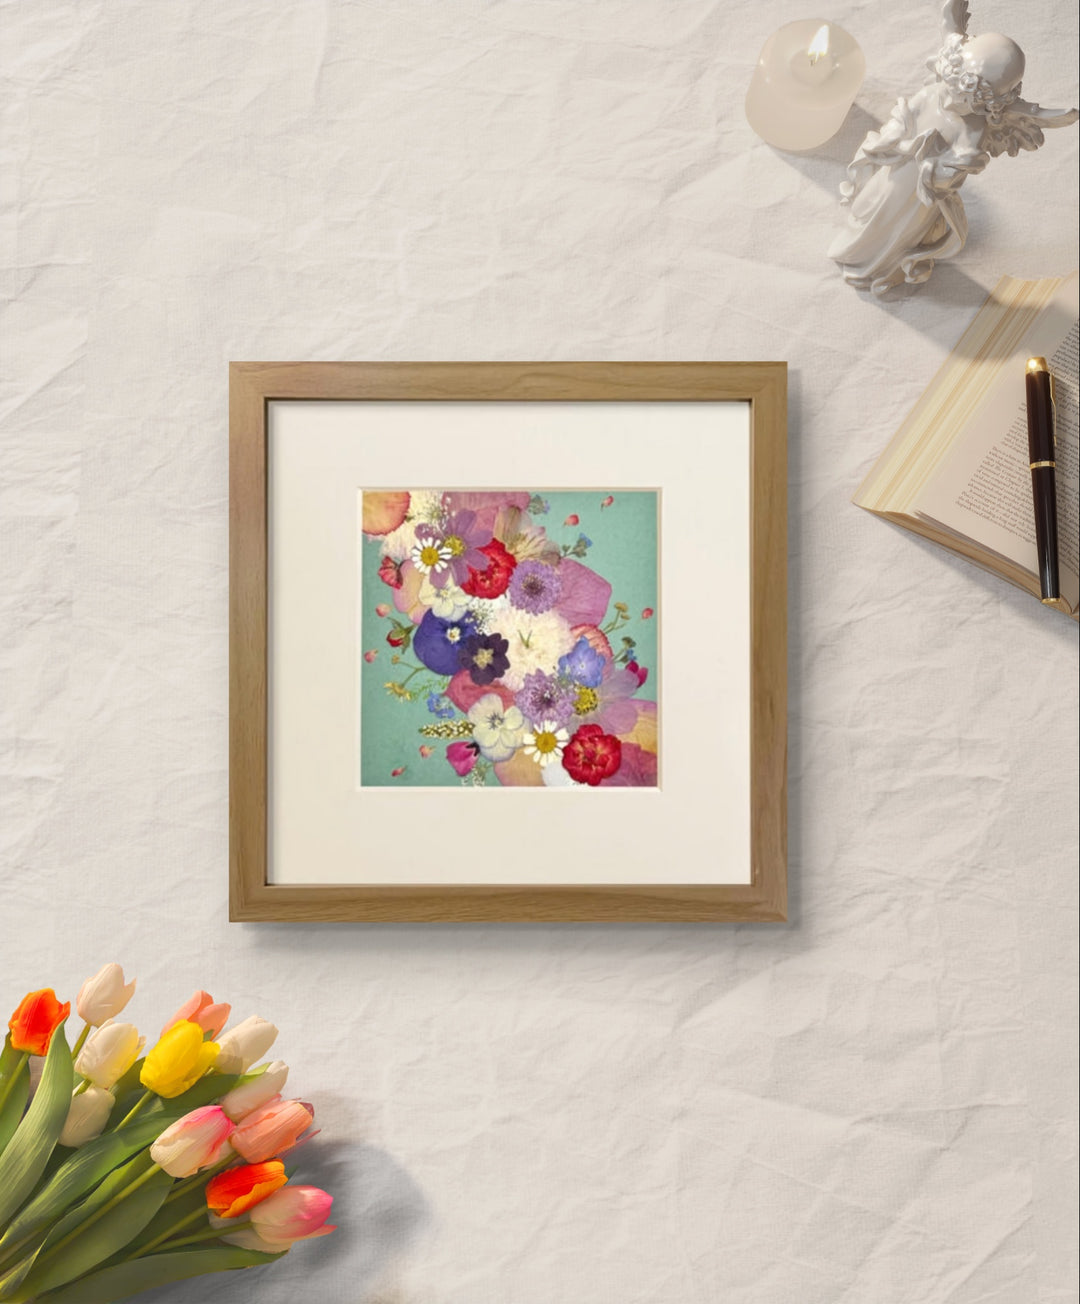 10 inches width 10 inches height pressed flower frame art that is green theme laying on the table.